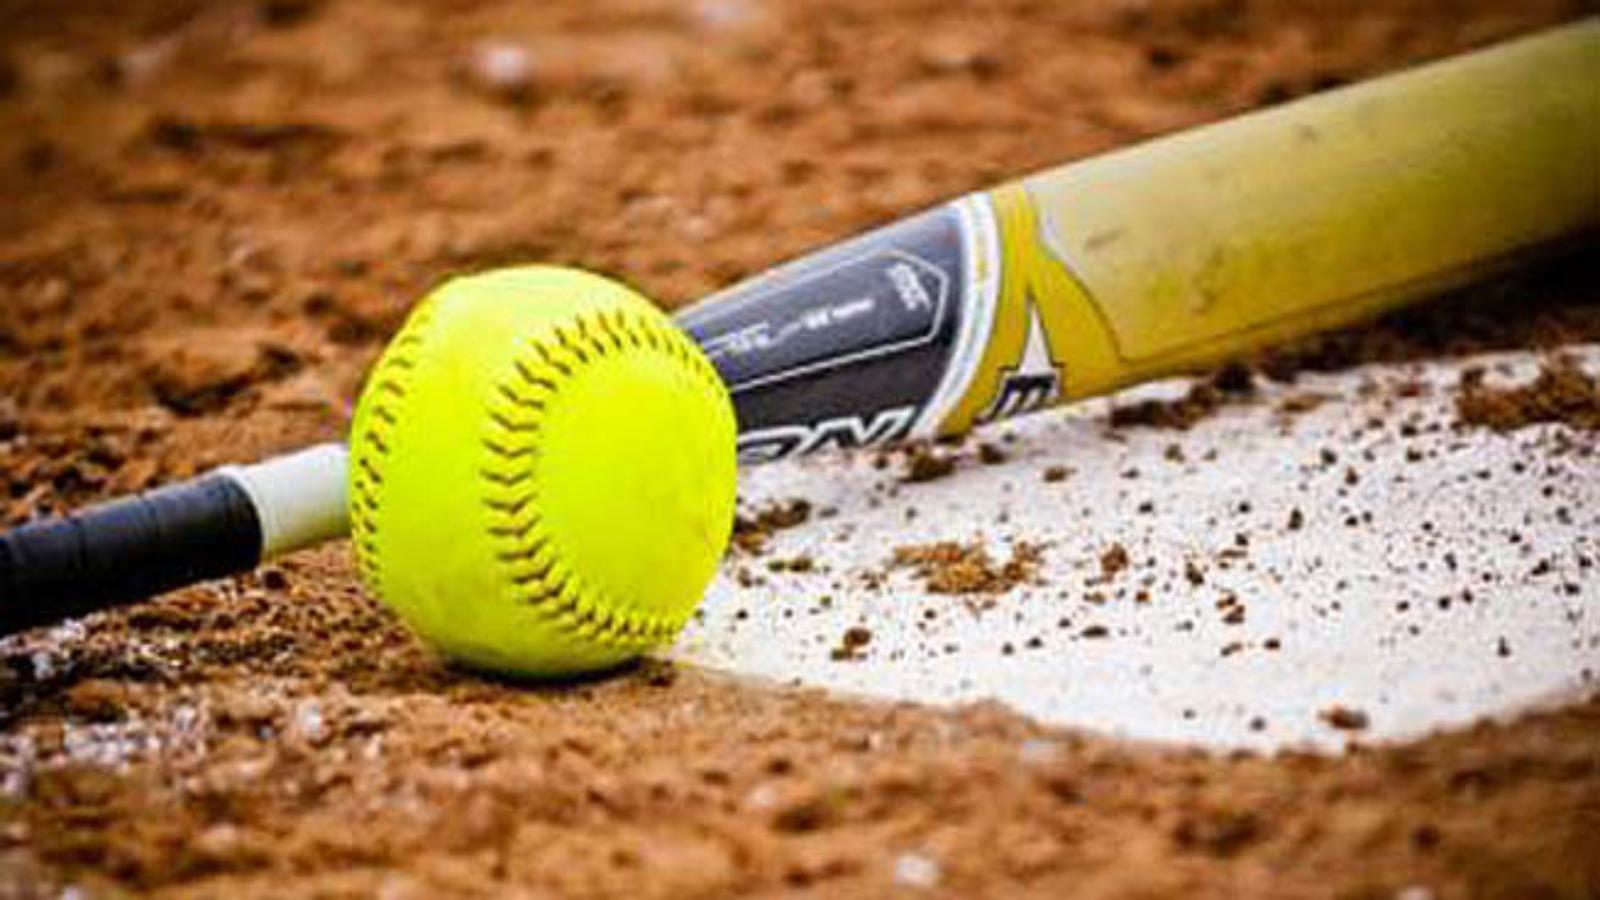 Girls Softball Images Browse 3266 Stock Photos  Vectors Free Download  with Trial  Shutterstock